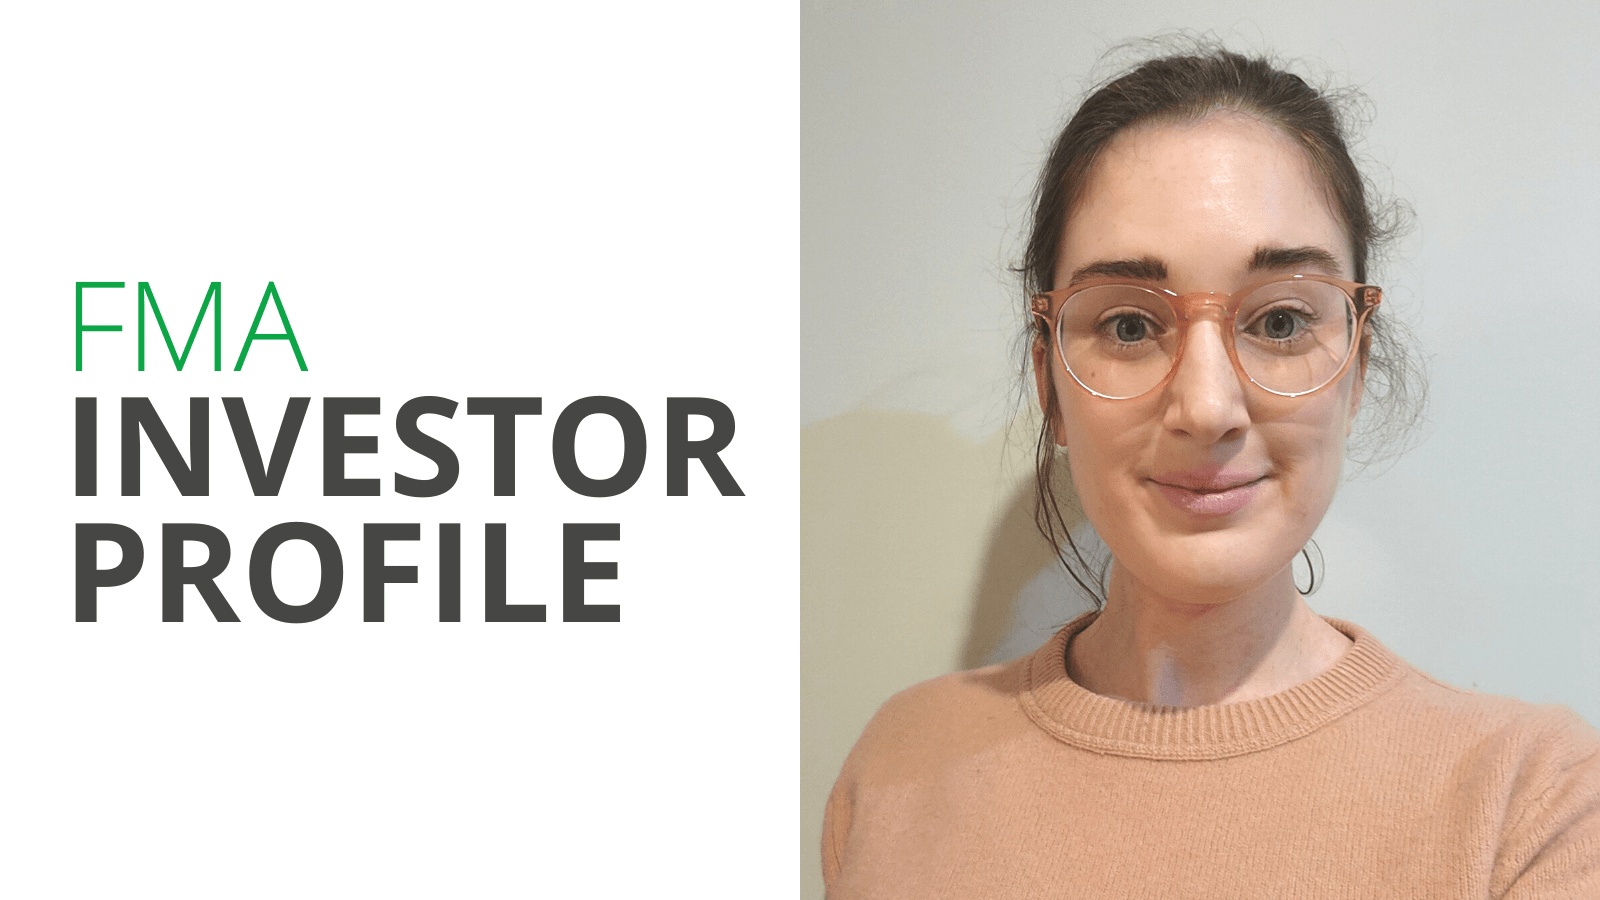 Investor Profile featuring Carla Fasher, a 29-year-old optometrist who got into investing as a student while working at a bank.